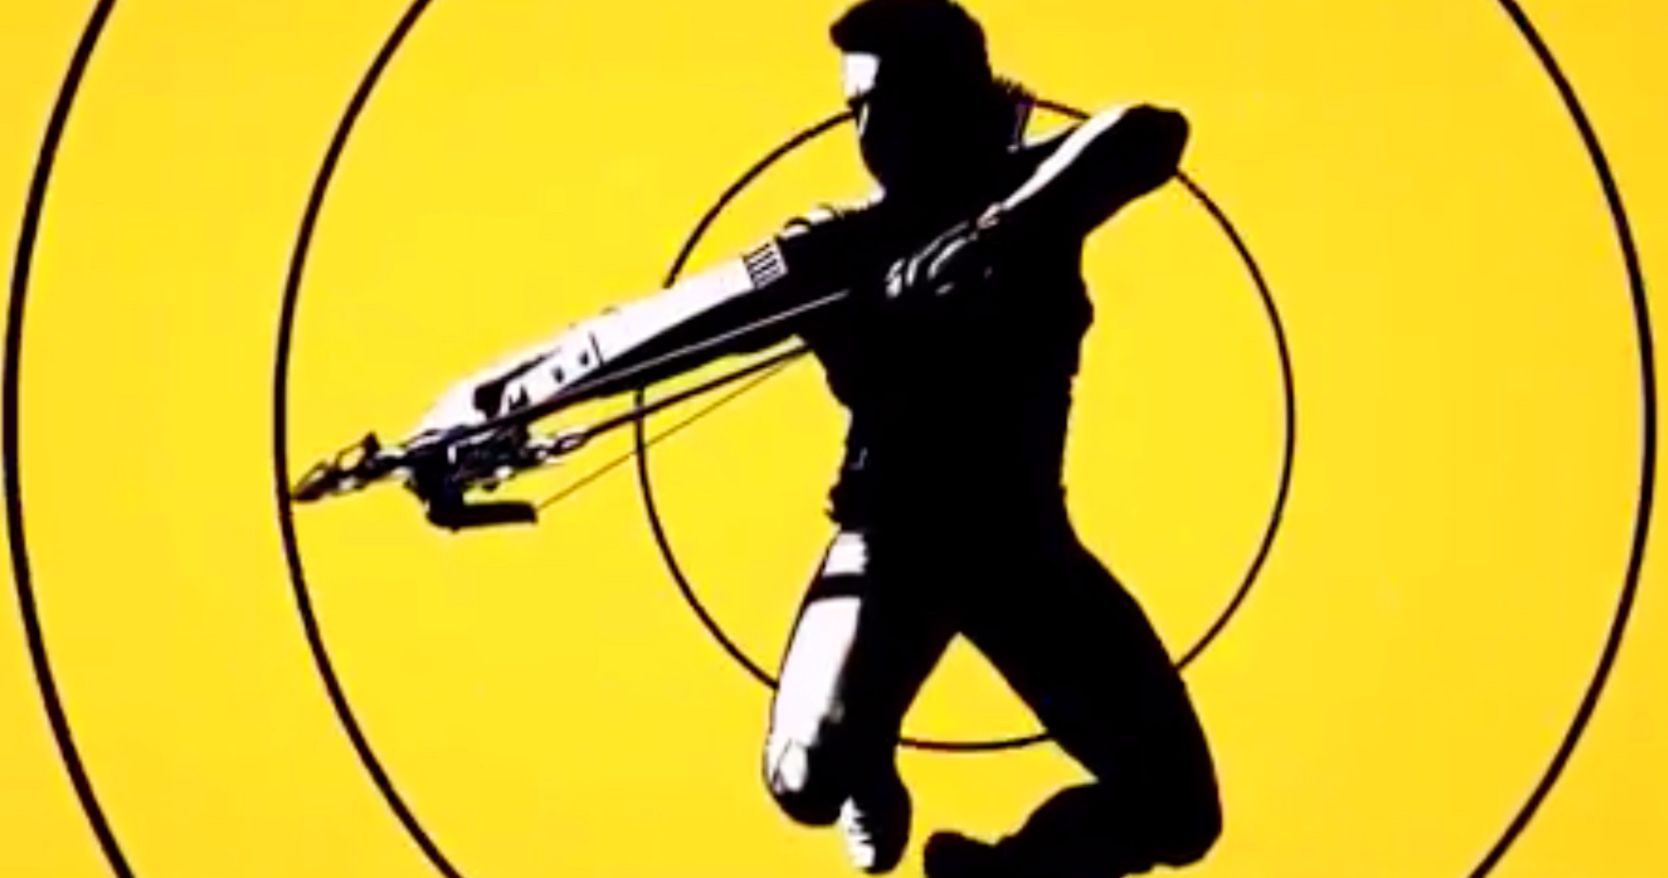 Hawkeye Opening Title Sequence Revealed from Disney+ Series